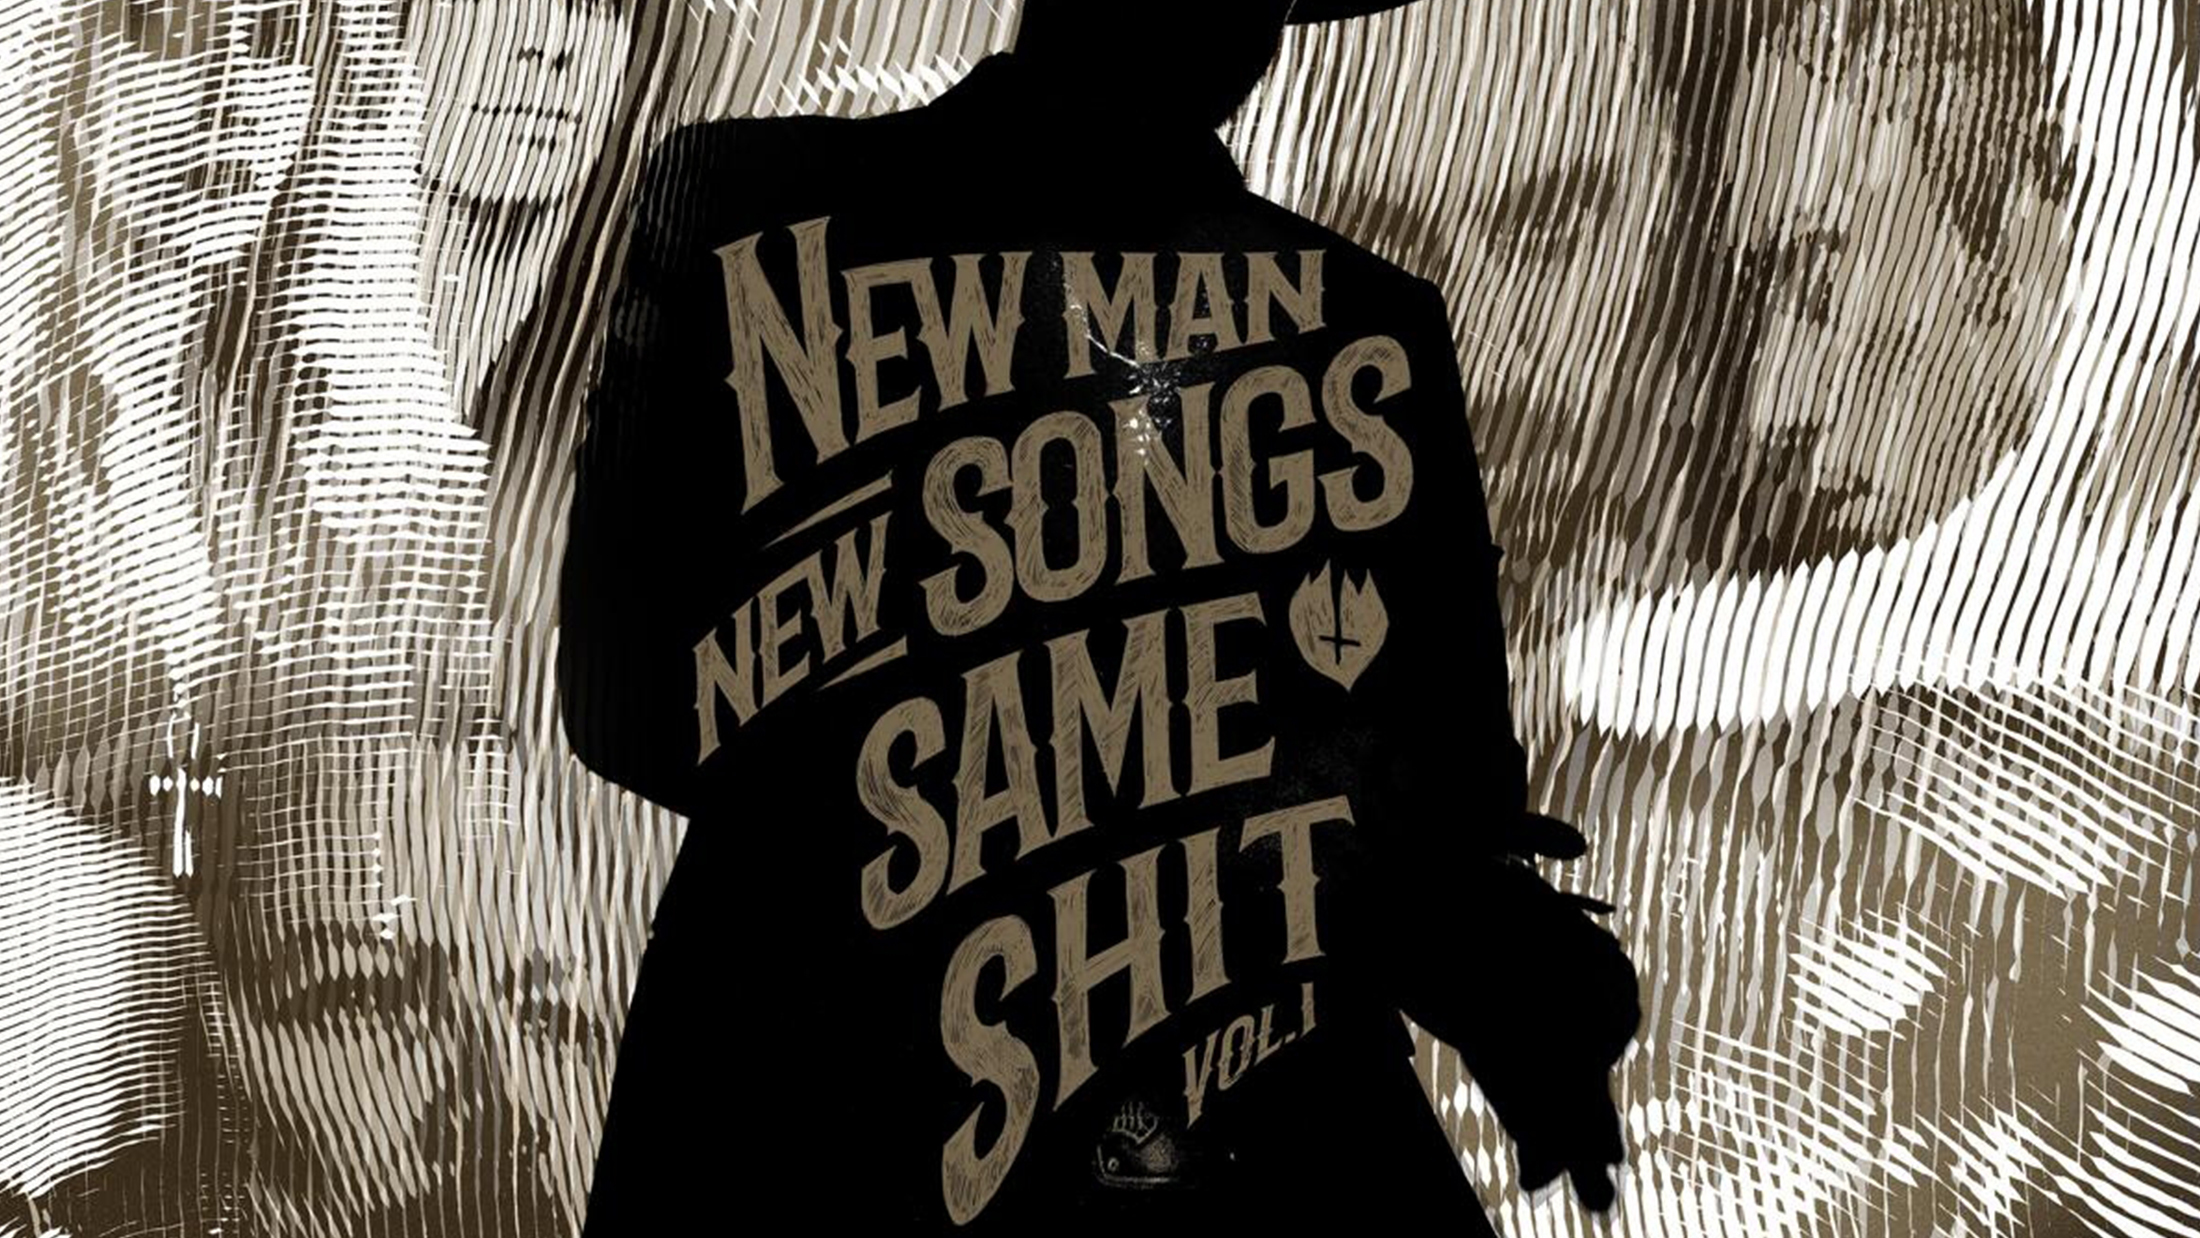 Me And That Man New Man New Songs Same Shit Vol1 Mediabook CD